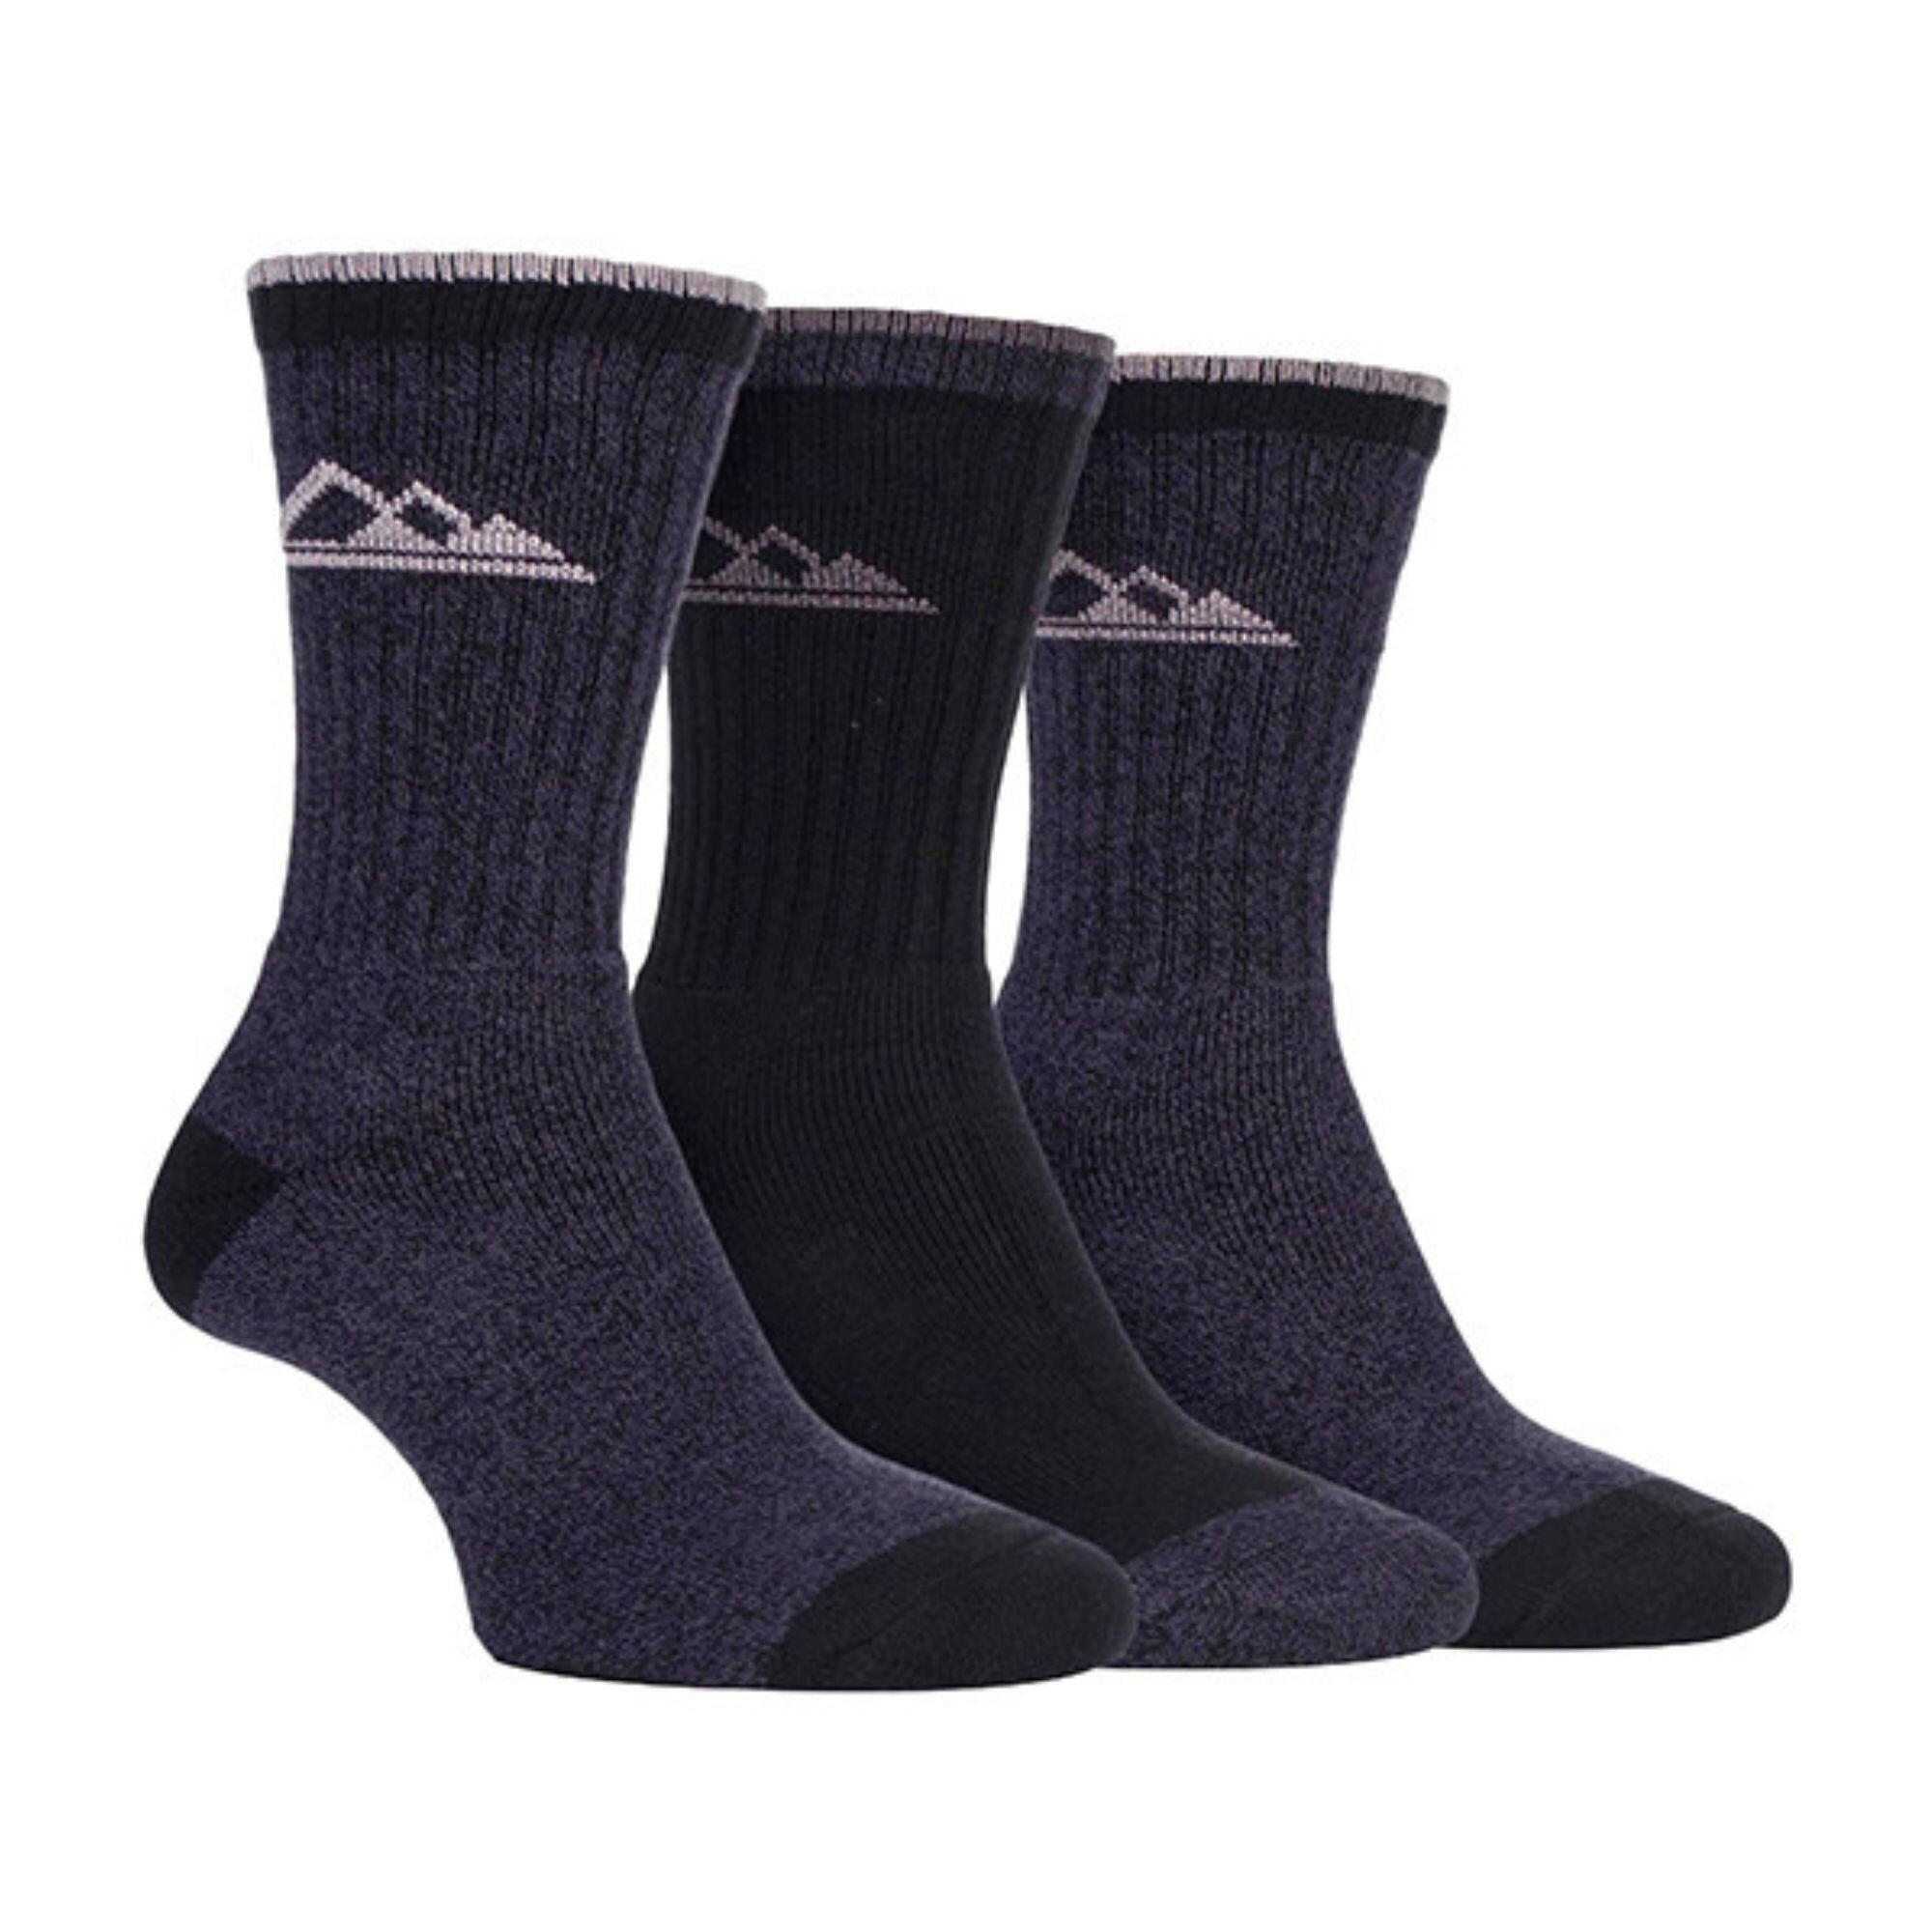 3 Pairs Ladies Lightweight Breathable Hiking Socks with Arch Support 1/7